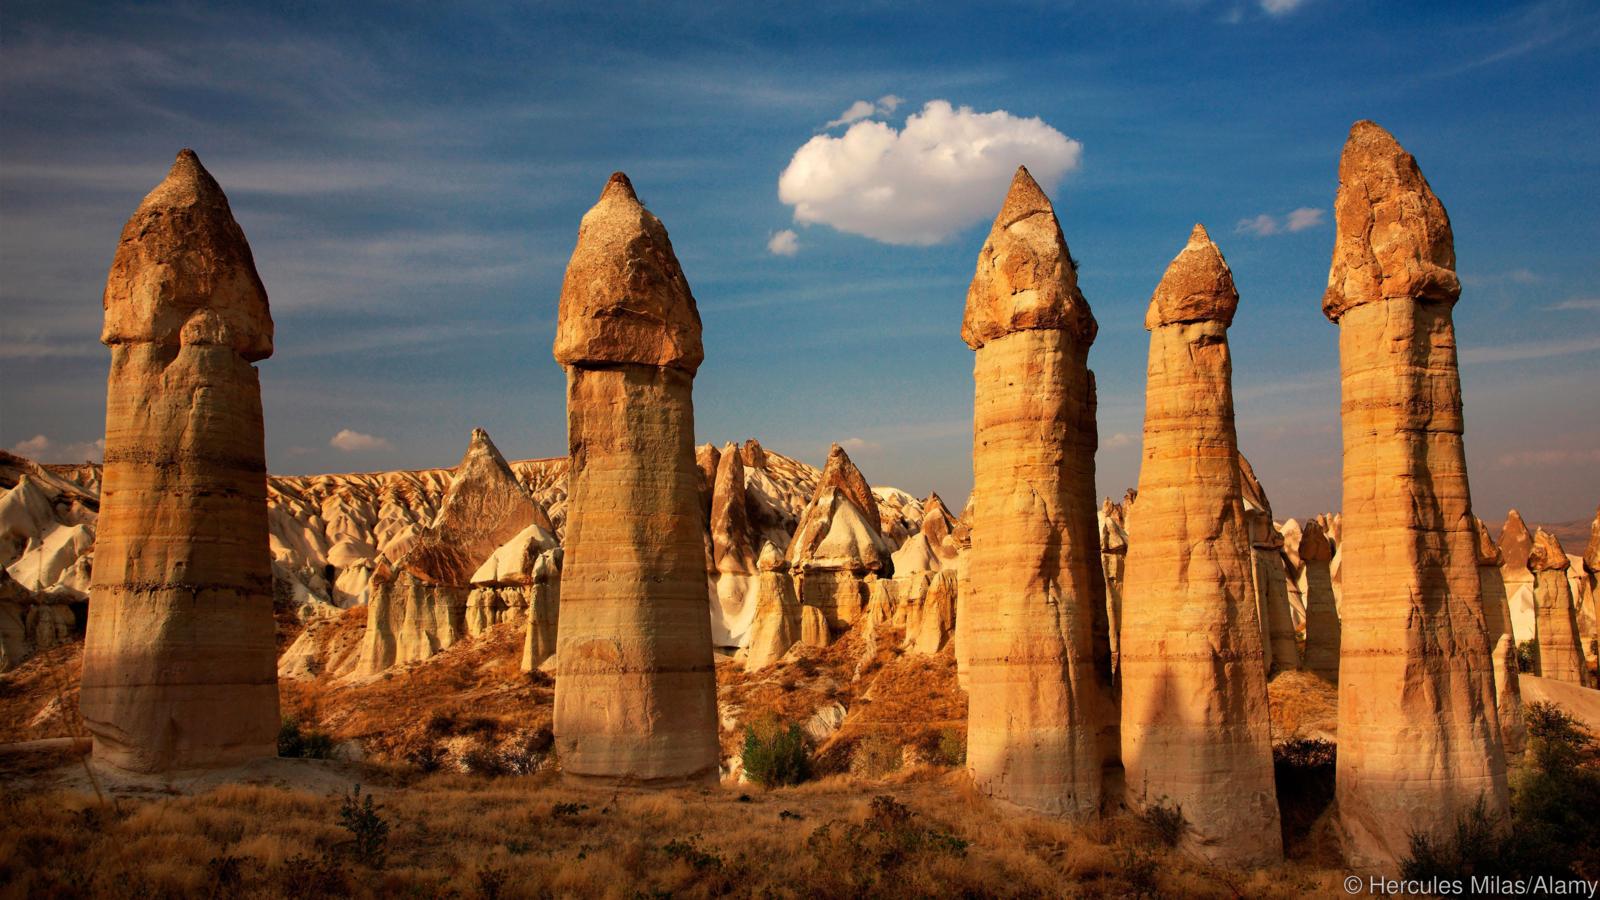 The Love Valley in Cappadocia, famous for its rock formations in phallic shape, Anatolia, Turkey.